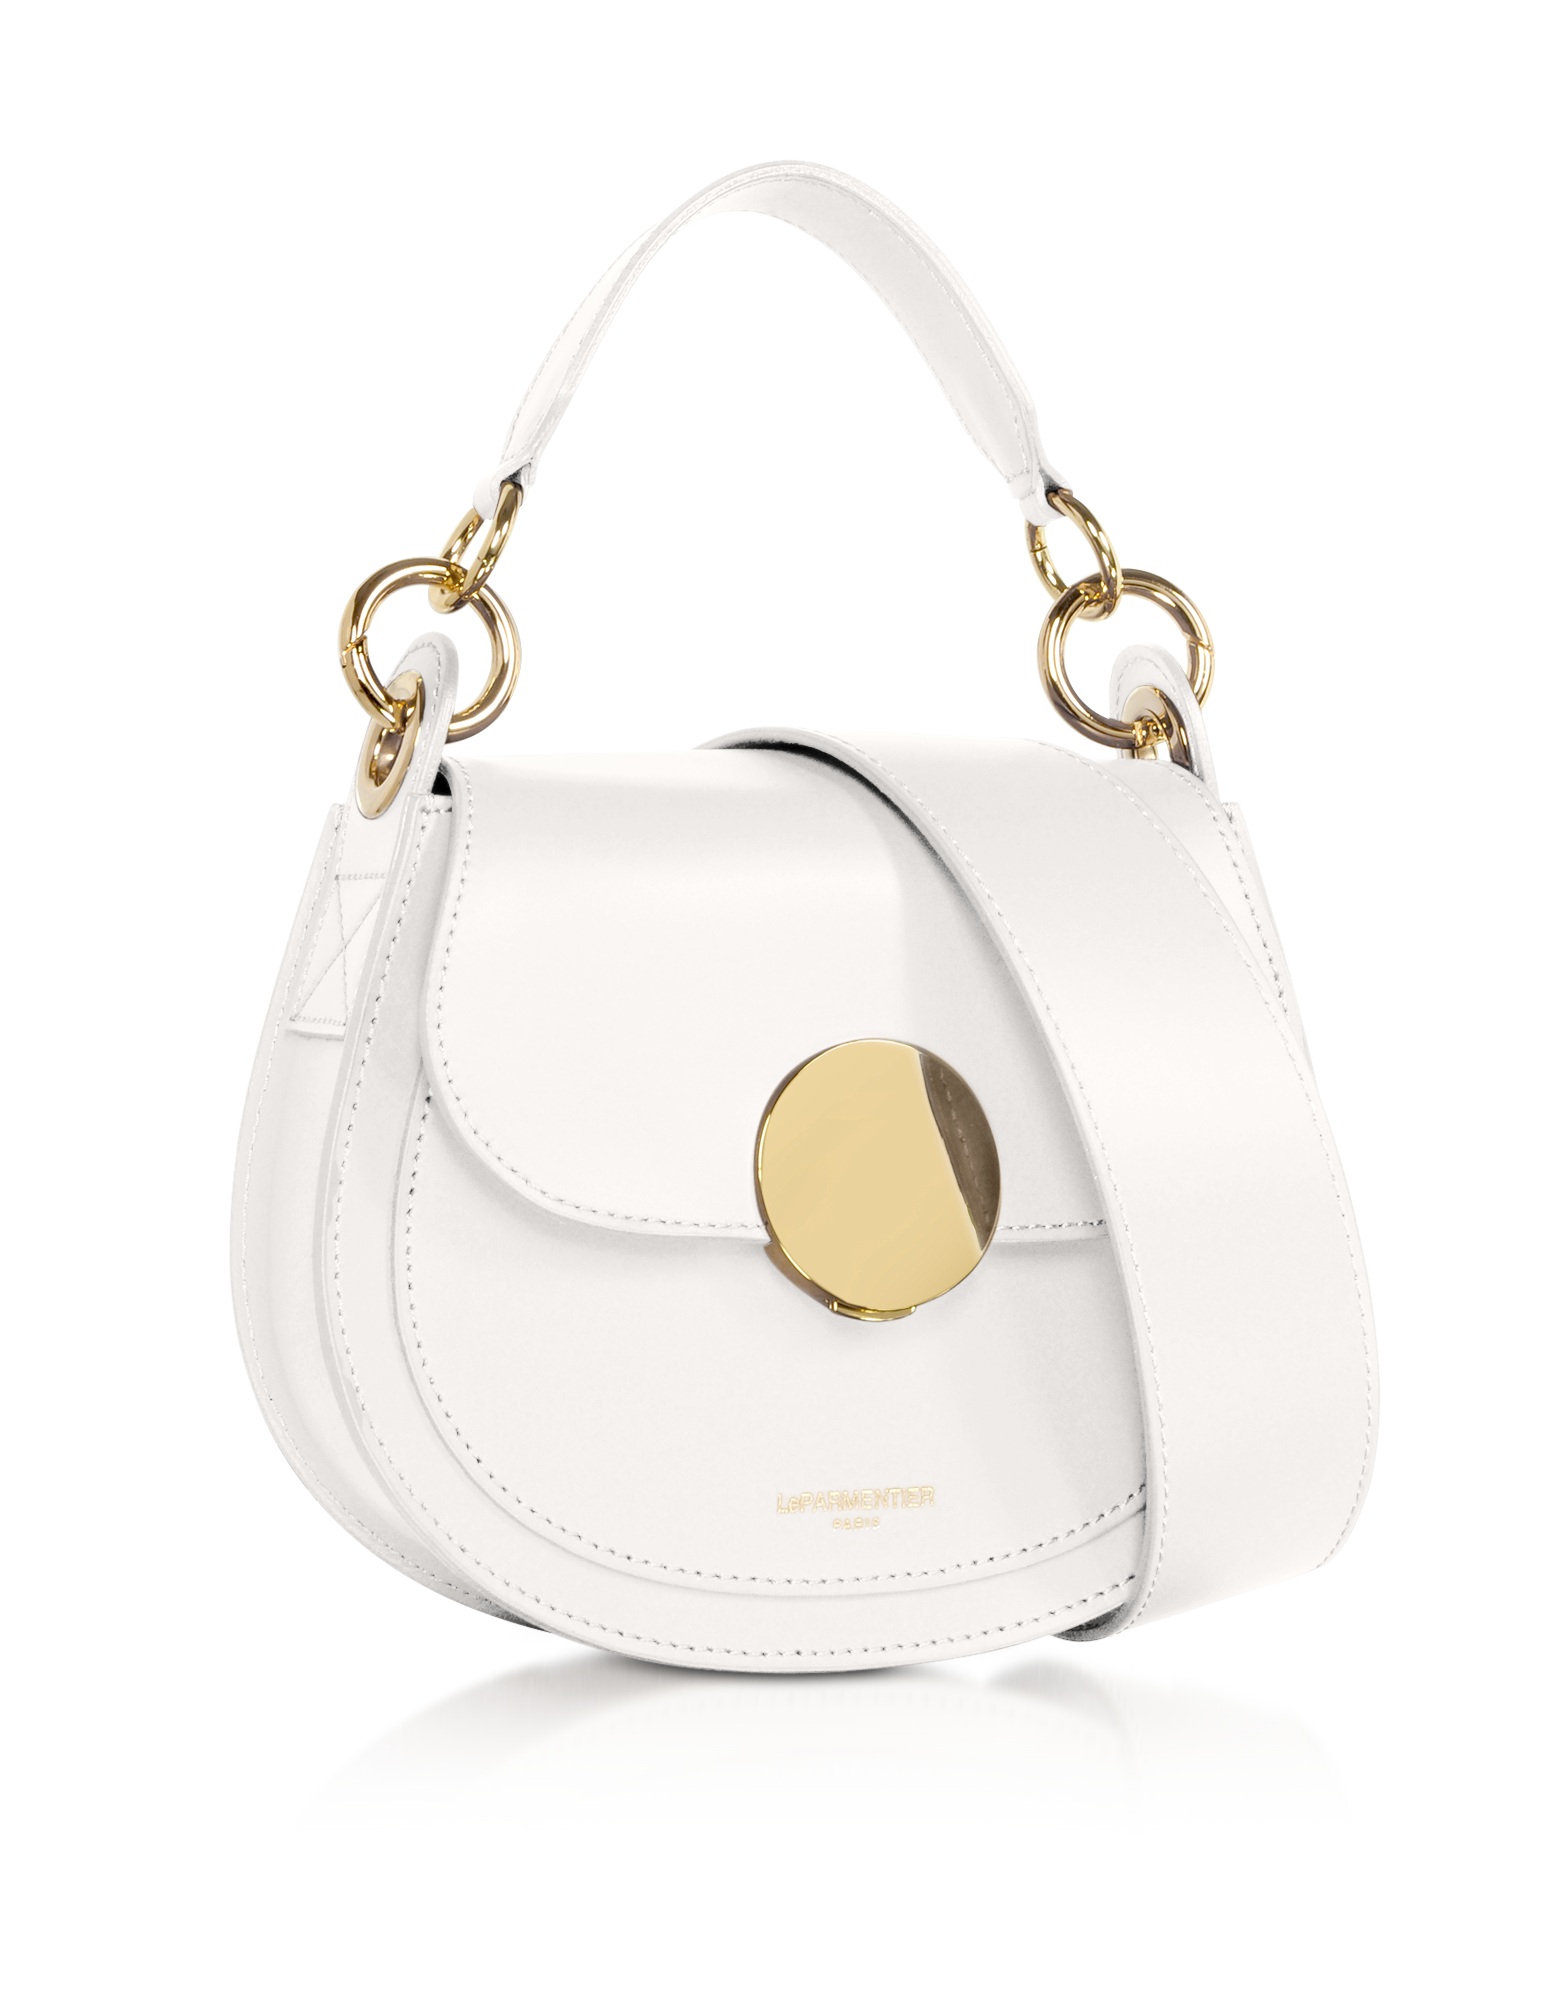 The Yucca Soho Shoulder Bag, from Le Parmentier at Mazzi D  Fiori, is made of smooth genuine Italian calf leather and features a modern interpretation of the classic saddle silhouette. It is designed to keep you organised throughout the day and perfect for casual fun nights. The bag includes a top handle, a flap top with a magnetic snap closure and bold hardware detail. There is also a pocket under the flap for additional storage. The wide shoulder strap is adjustable for your comfort. 